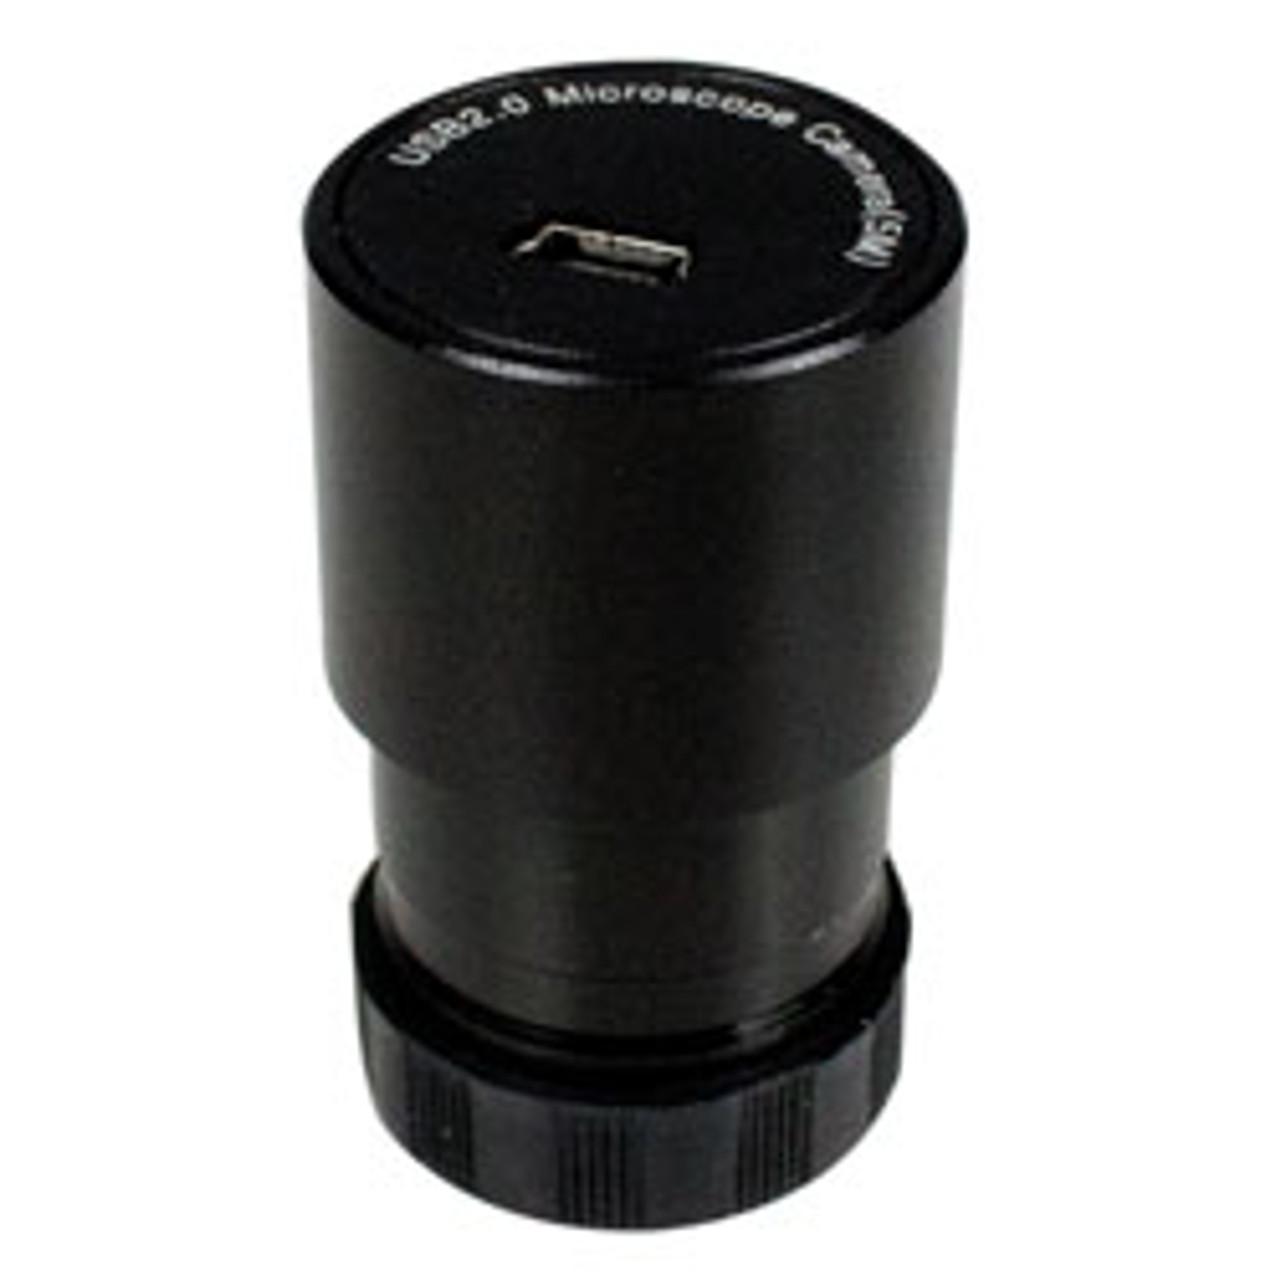 Walter Products 5MP Industrial Built-In Eyepiece Camera